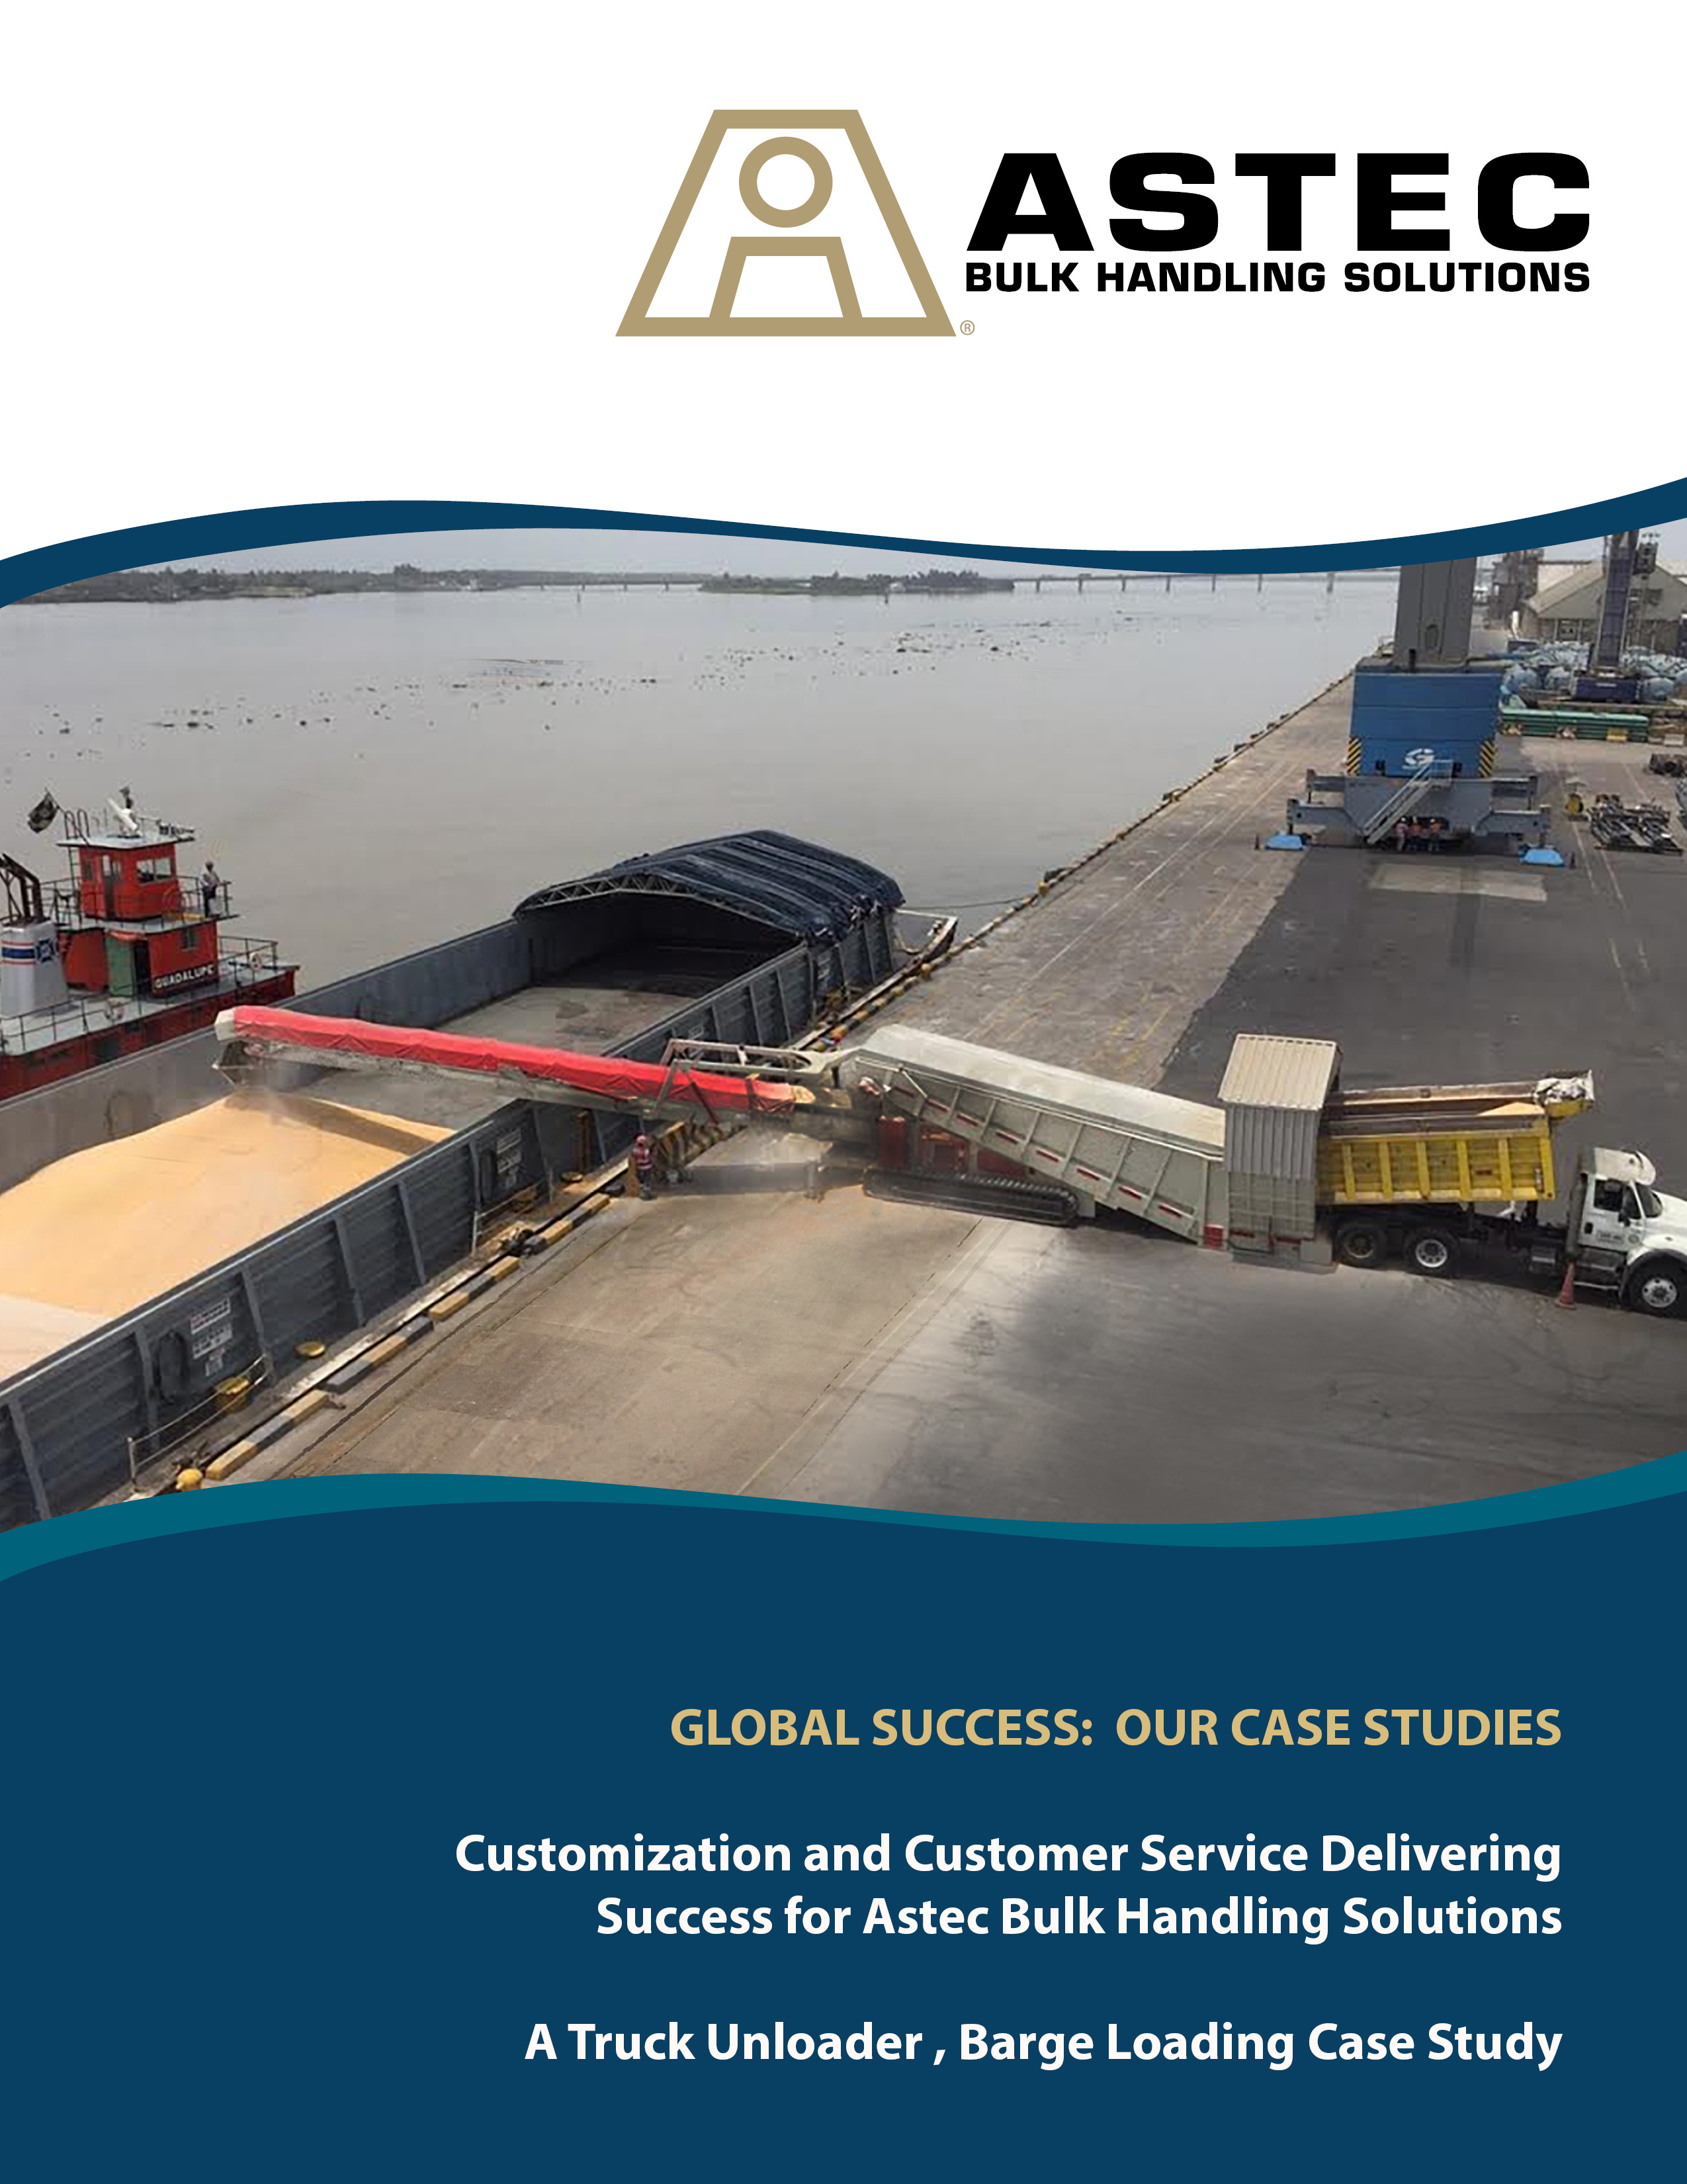 ABHS - Case Study - Truck Unloader in Barge Loading Application